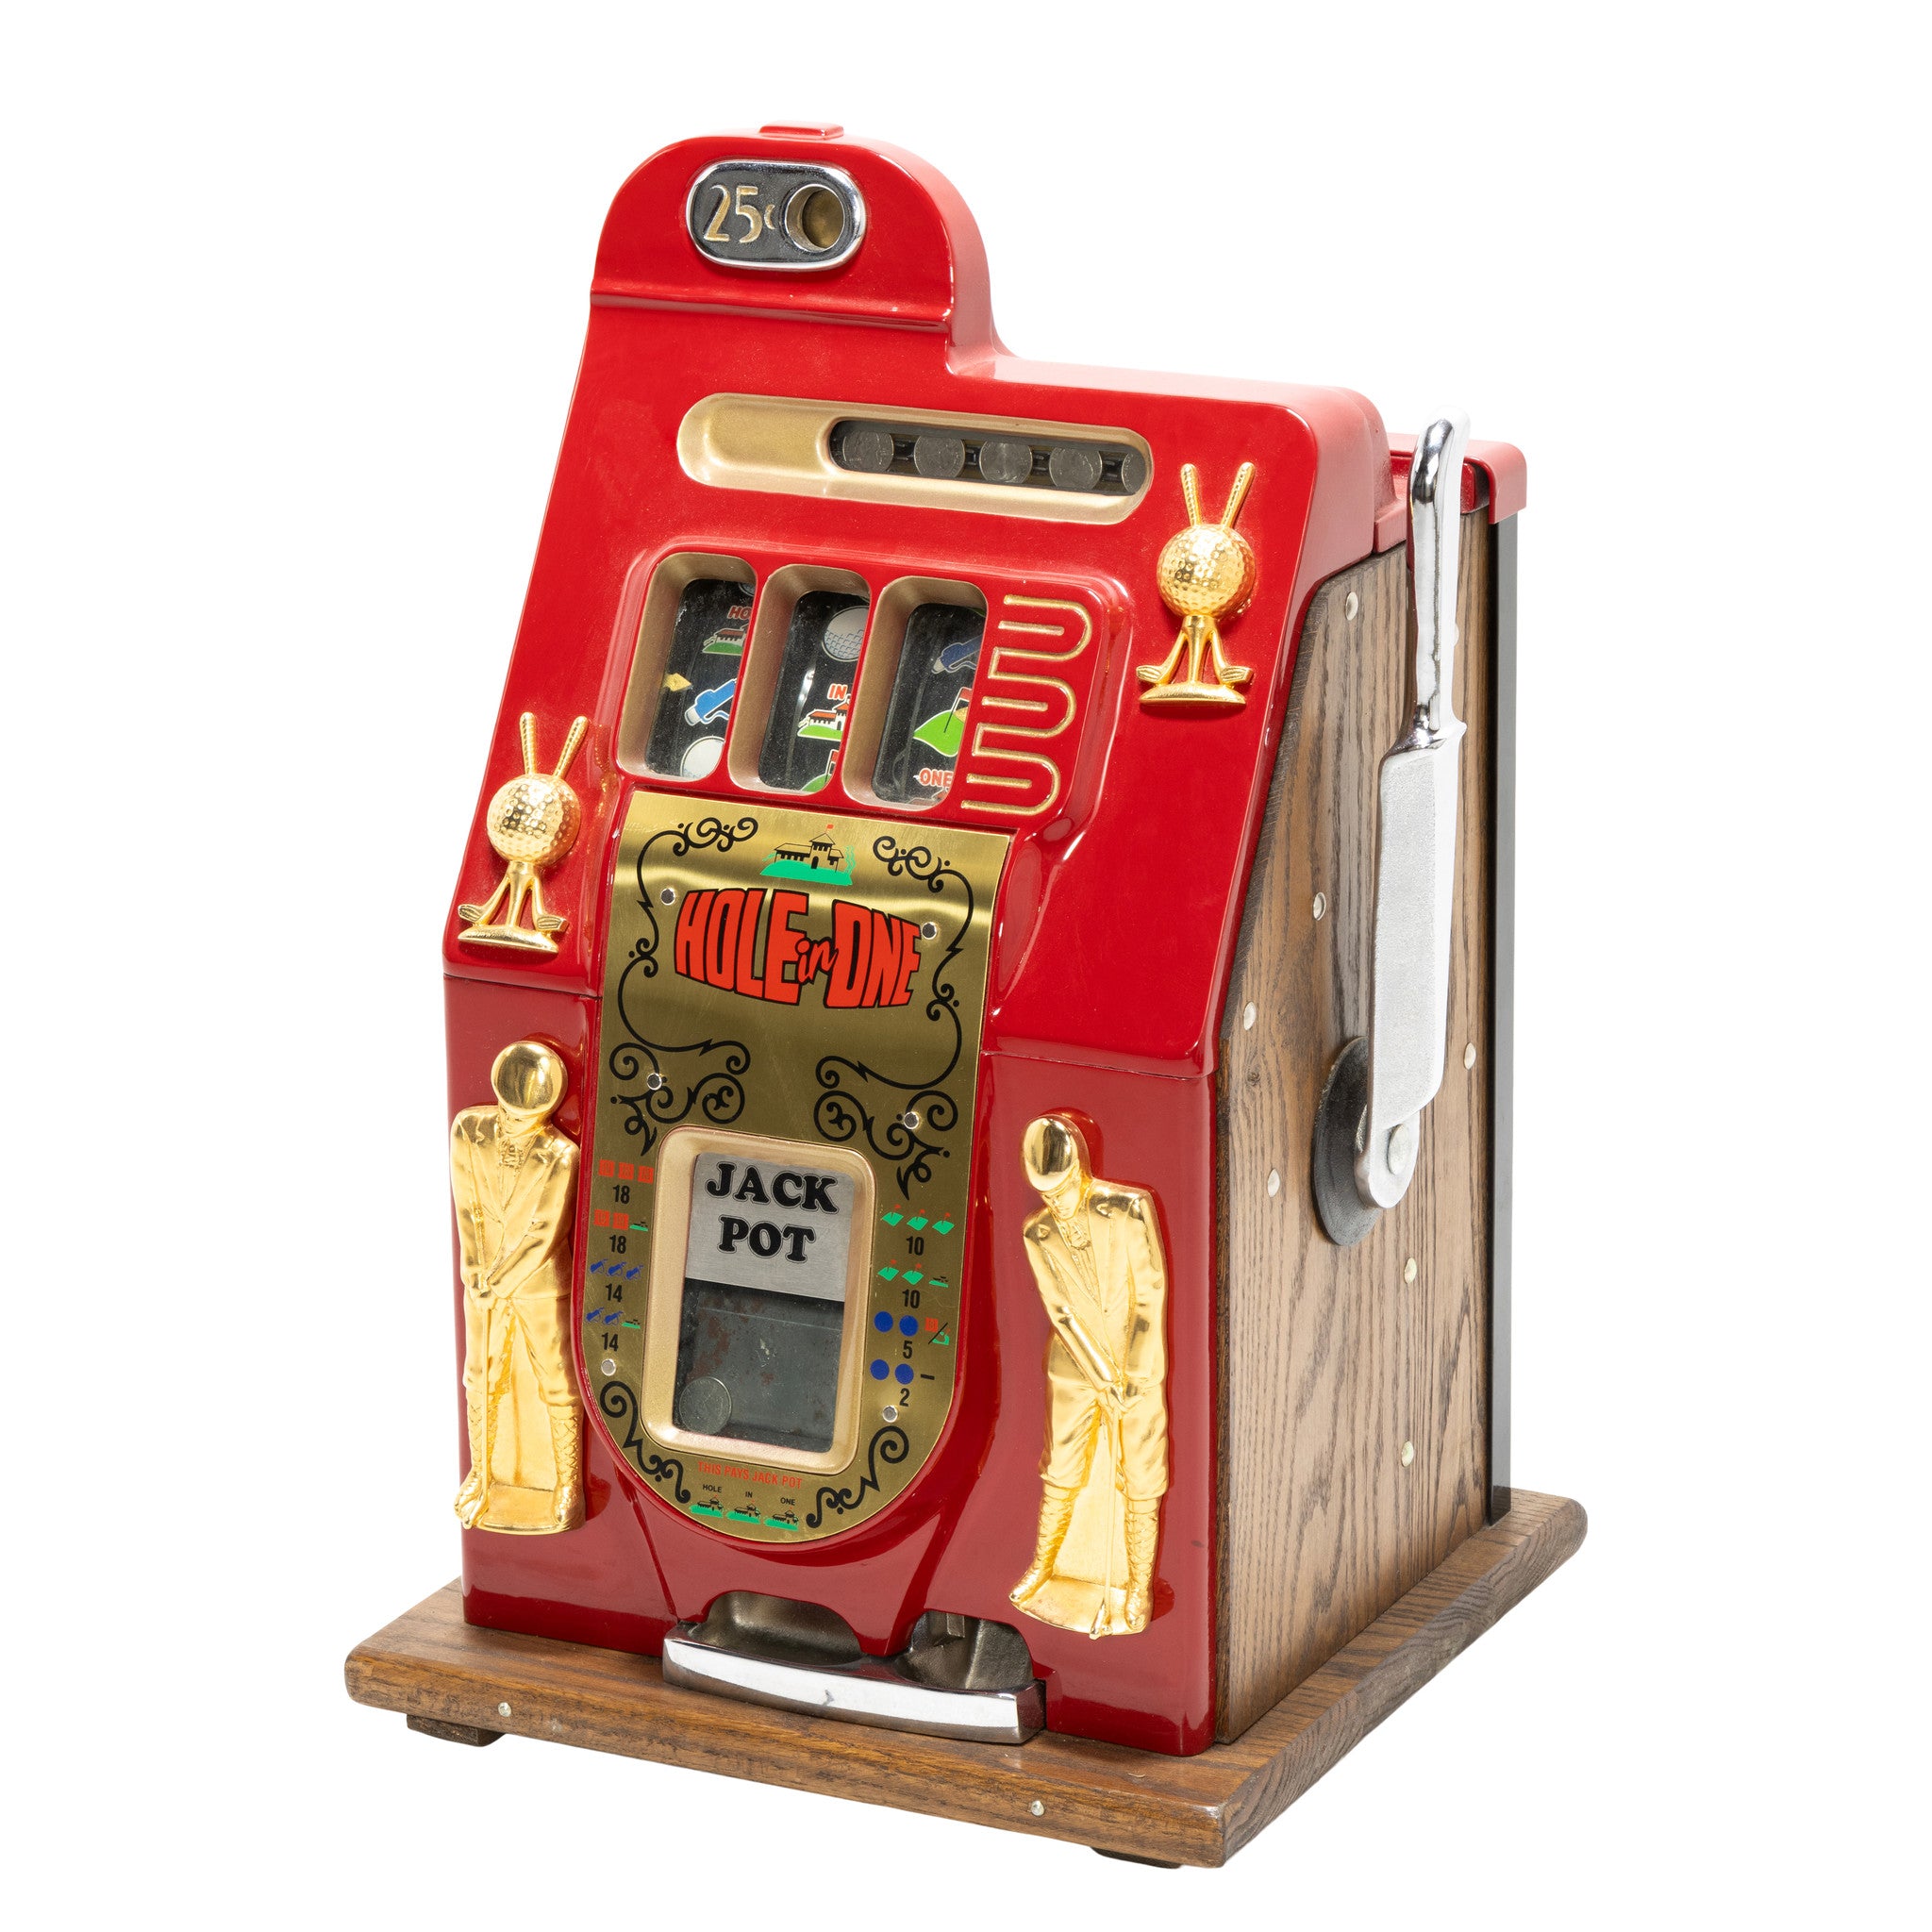 Mills Novelty Co. Hole in One Slot Machine